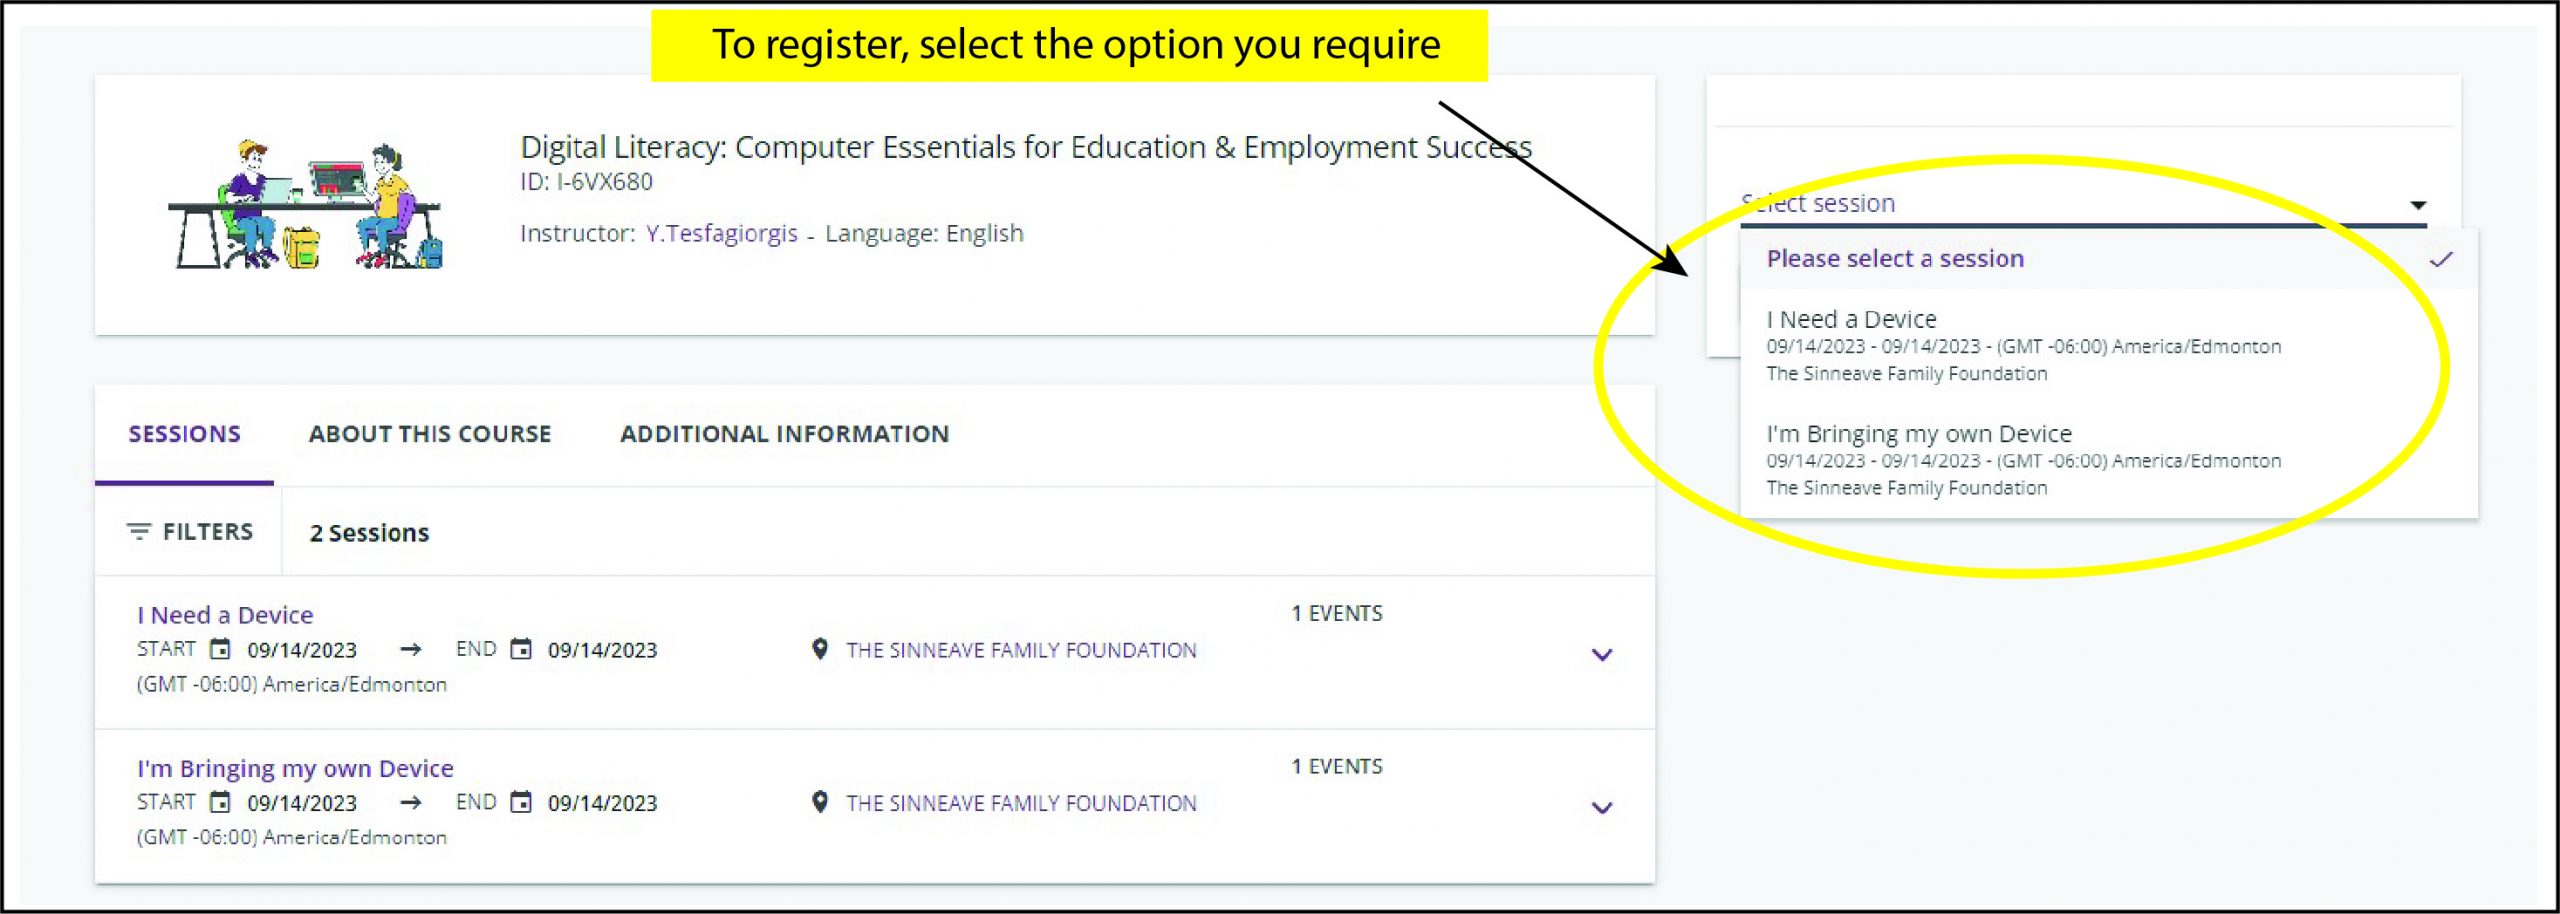 A screen shot of the registration page with an arrow pointing to the options the user must select from.